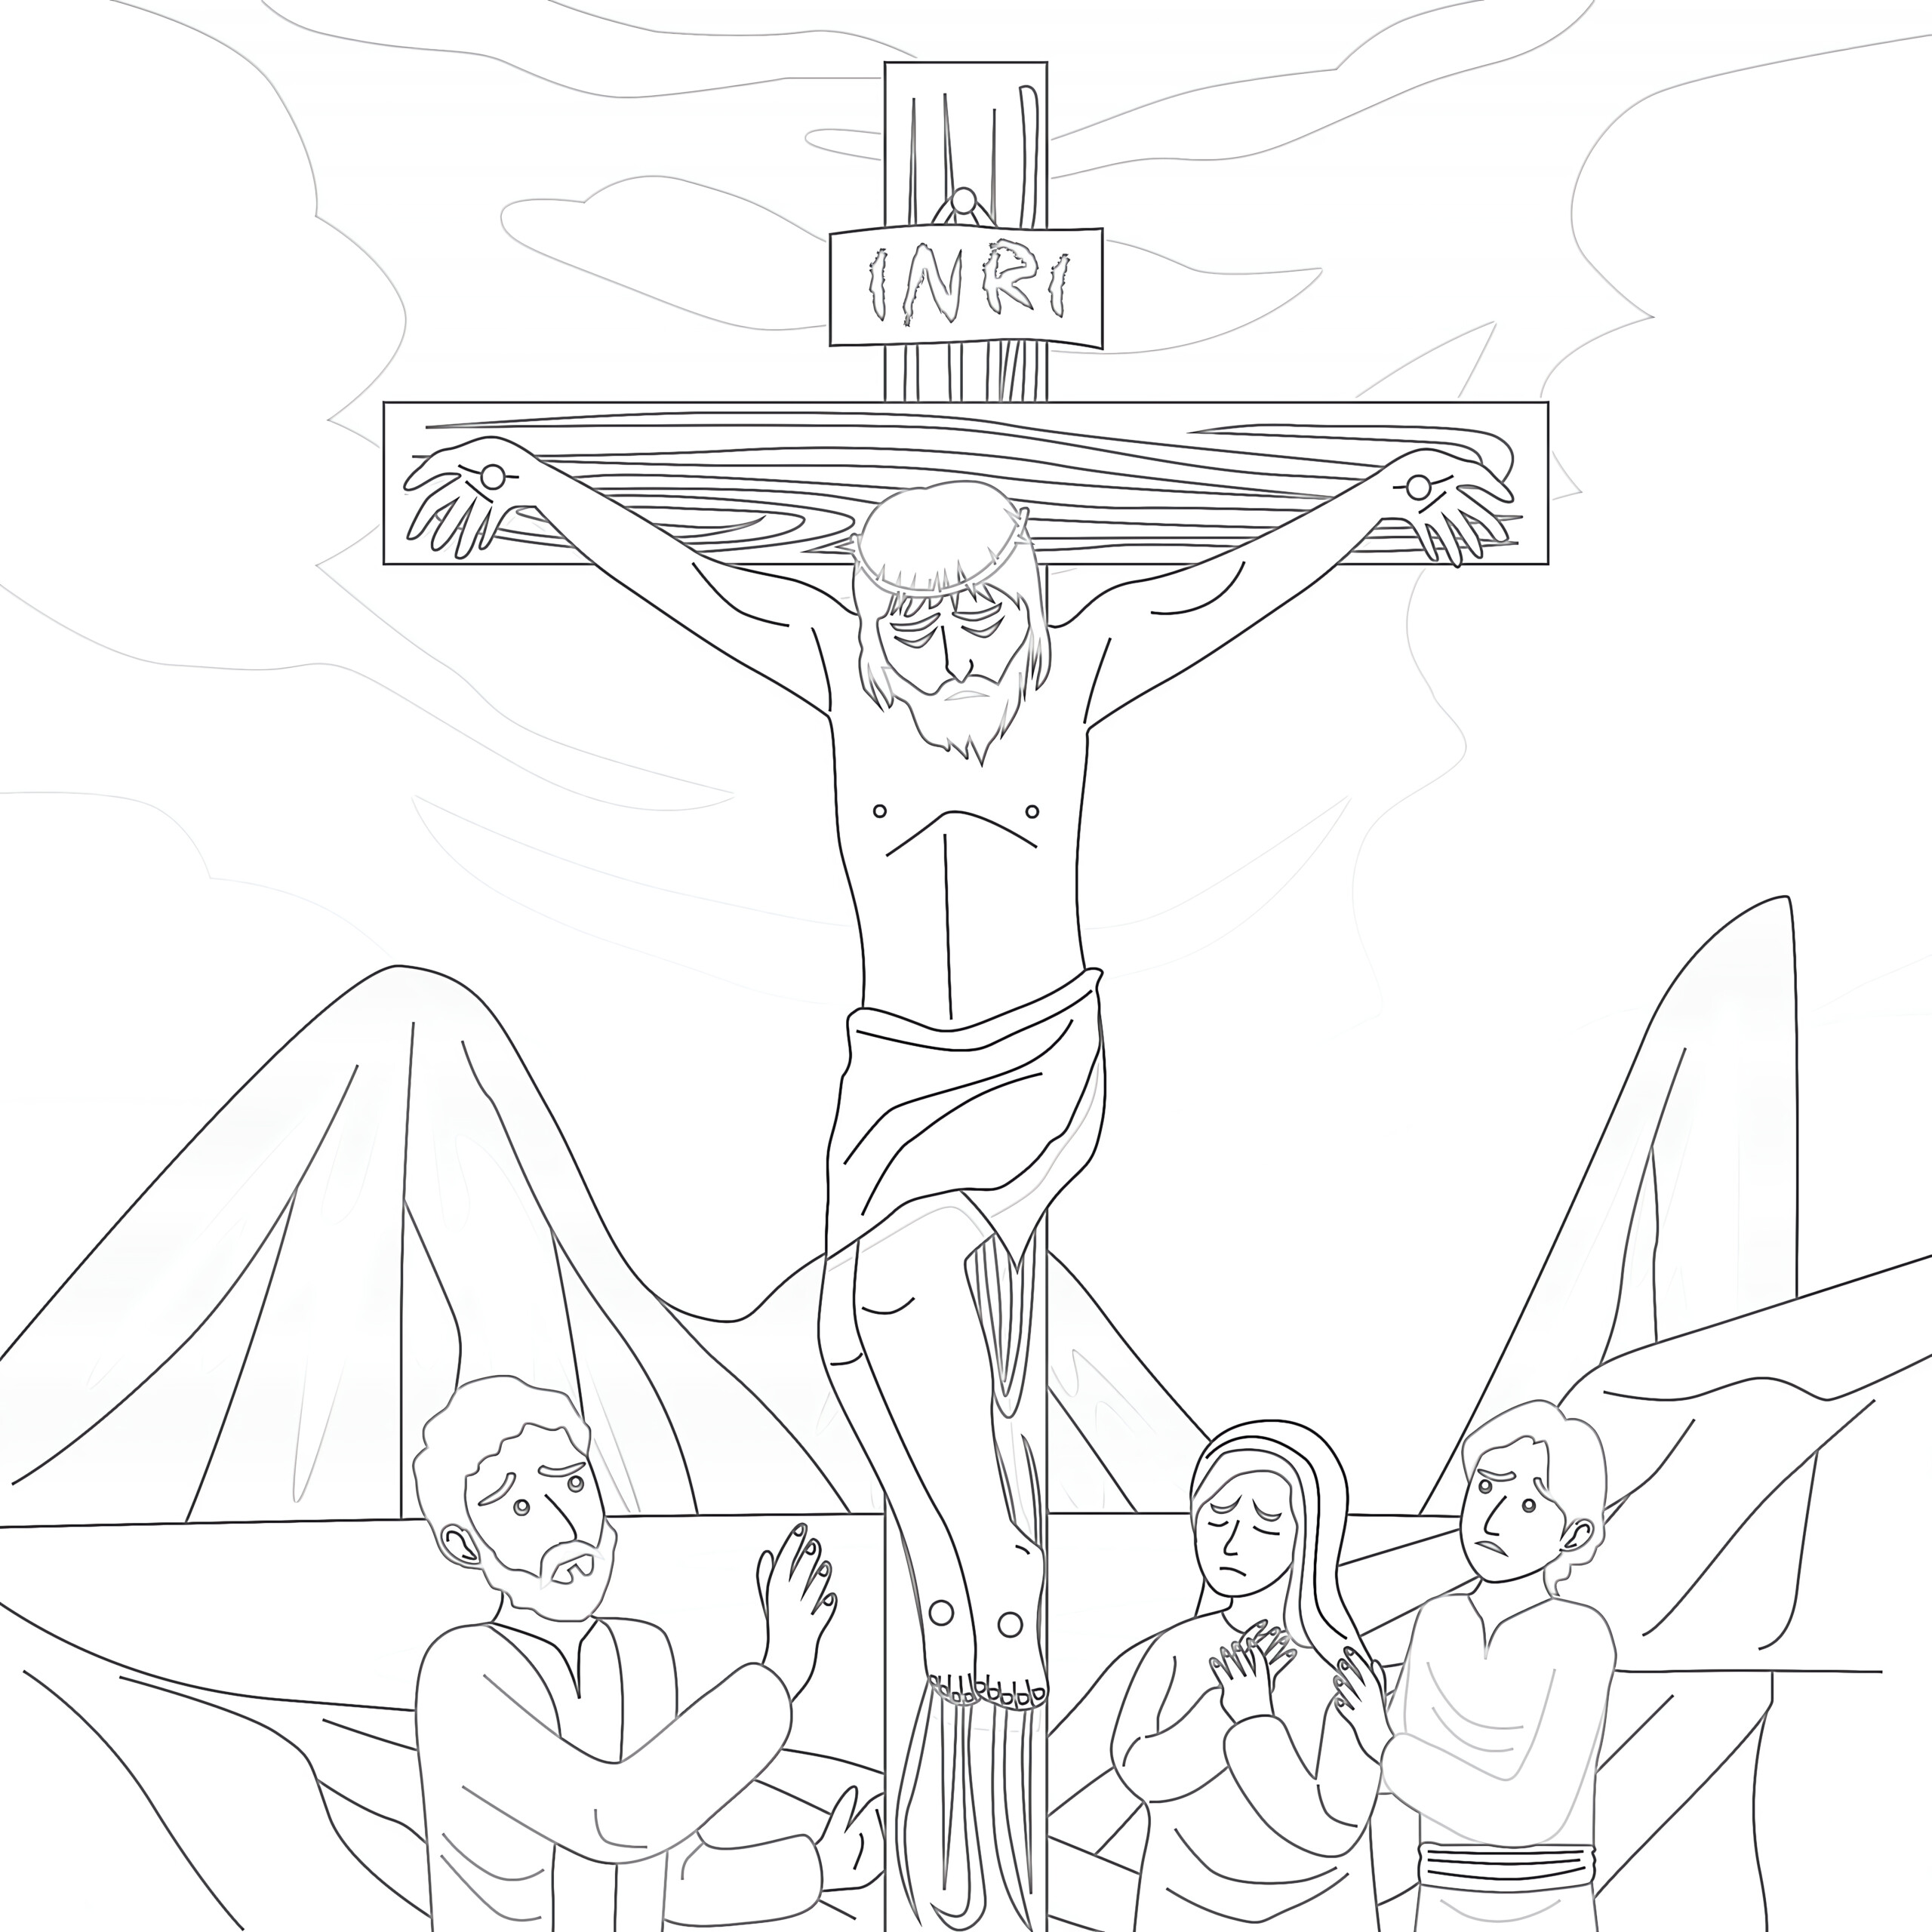 Jesus Died On The Cross - Coloring page